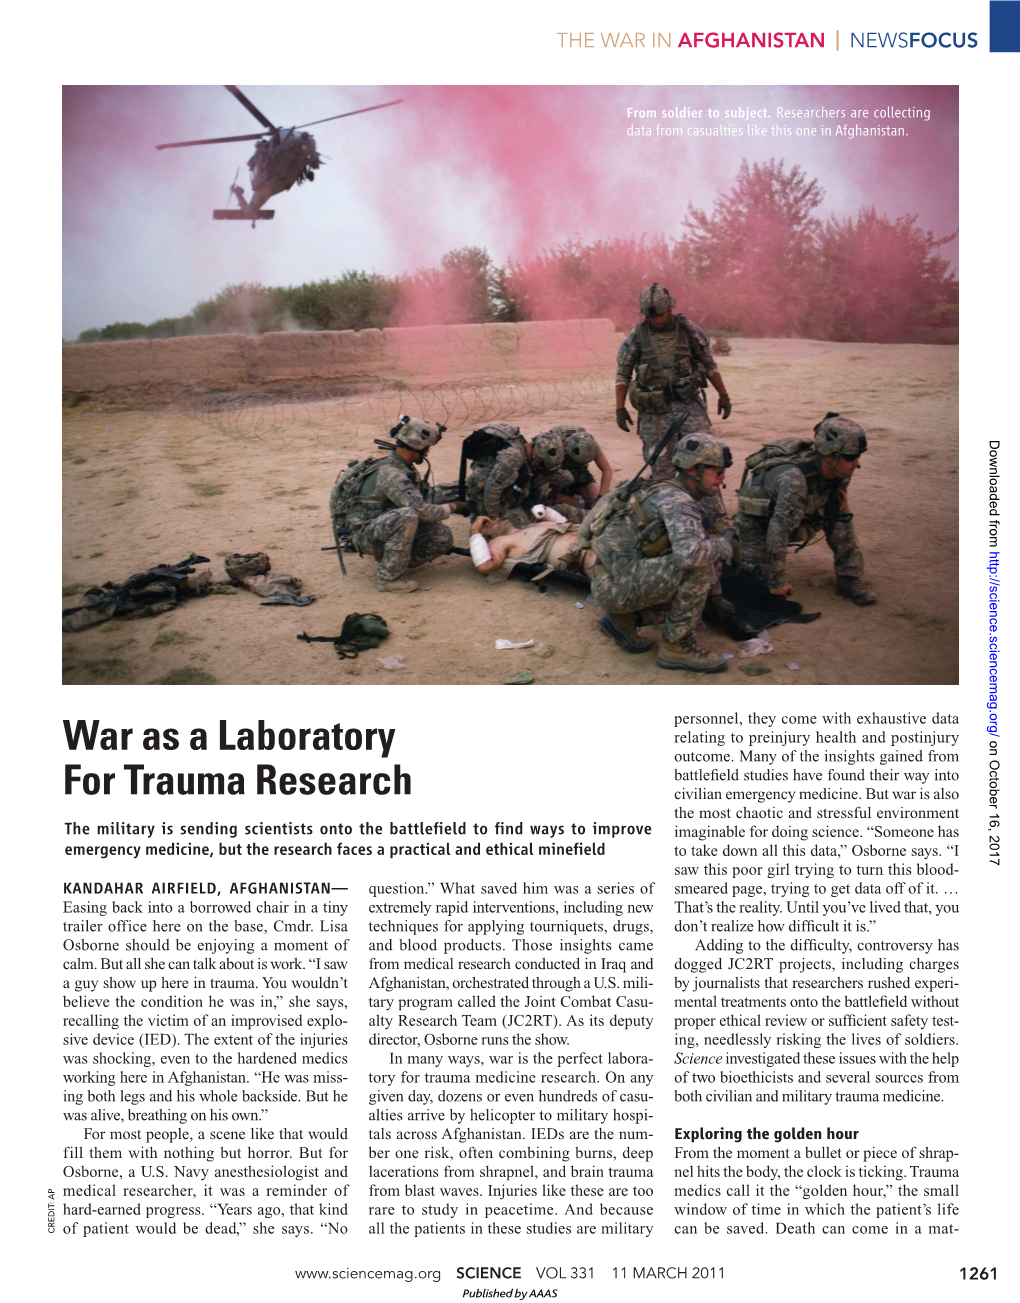 The War in Afghanistan: War As a Labortory for Trauma Research